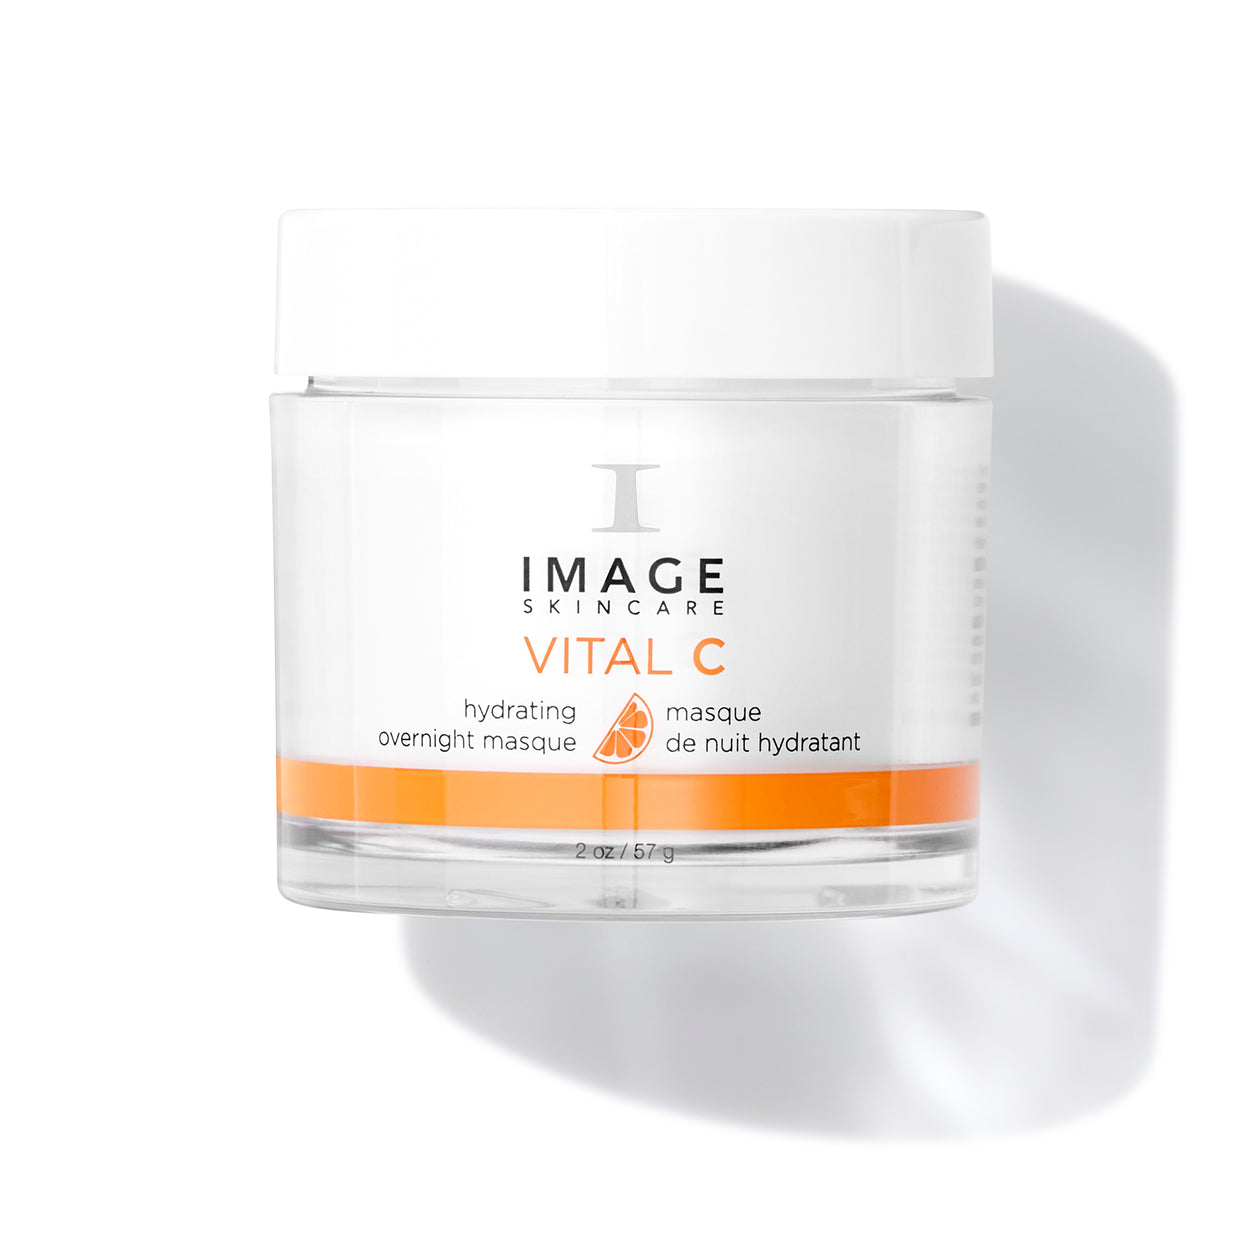 Image Skincare Vital C Hydrating Overnight Mask Shop At Exclusive Beauty